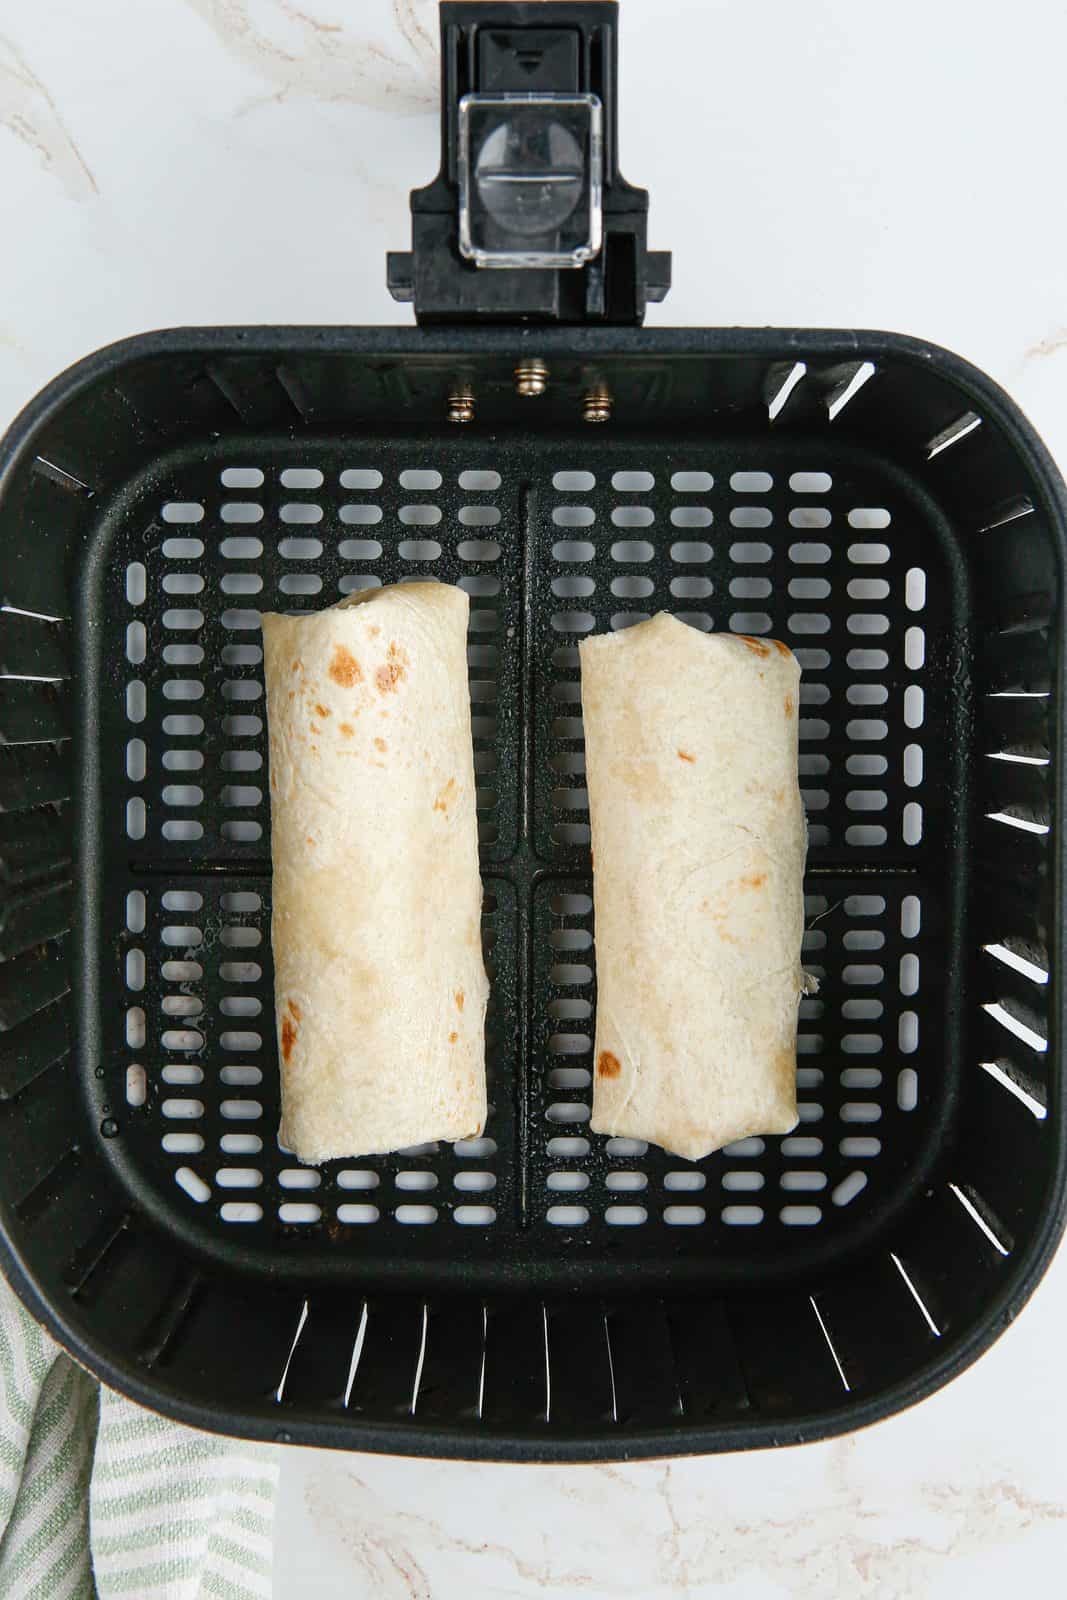 Folded chimichangas in air fryer basket.